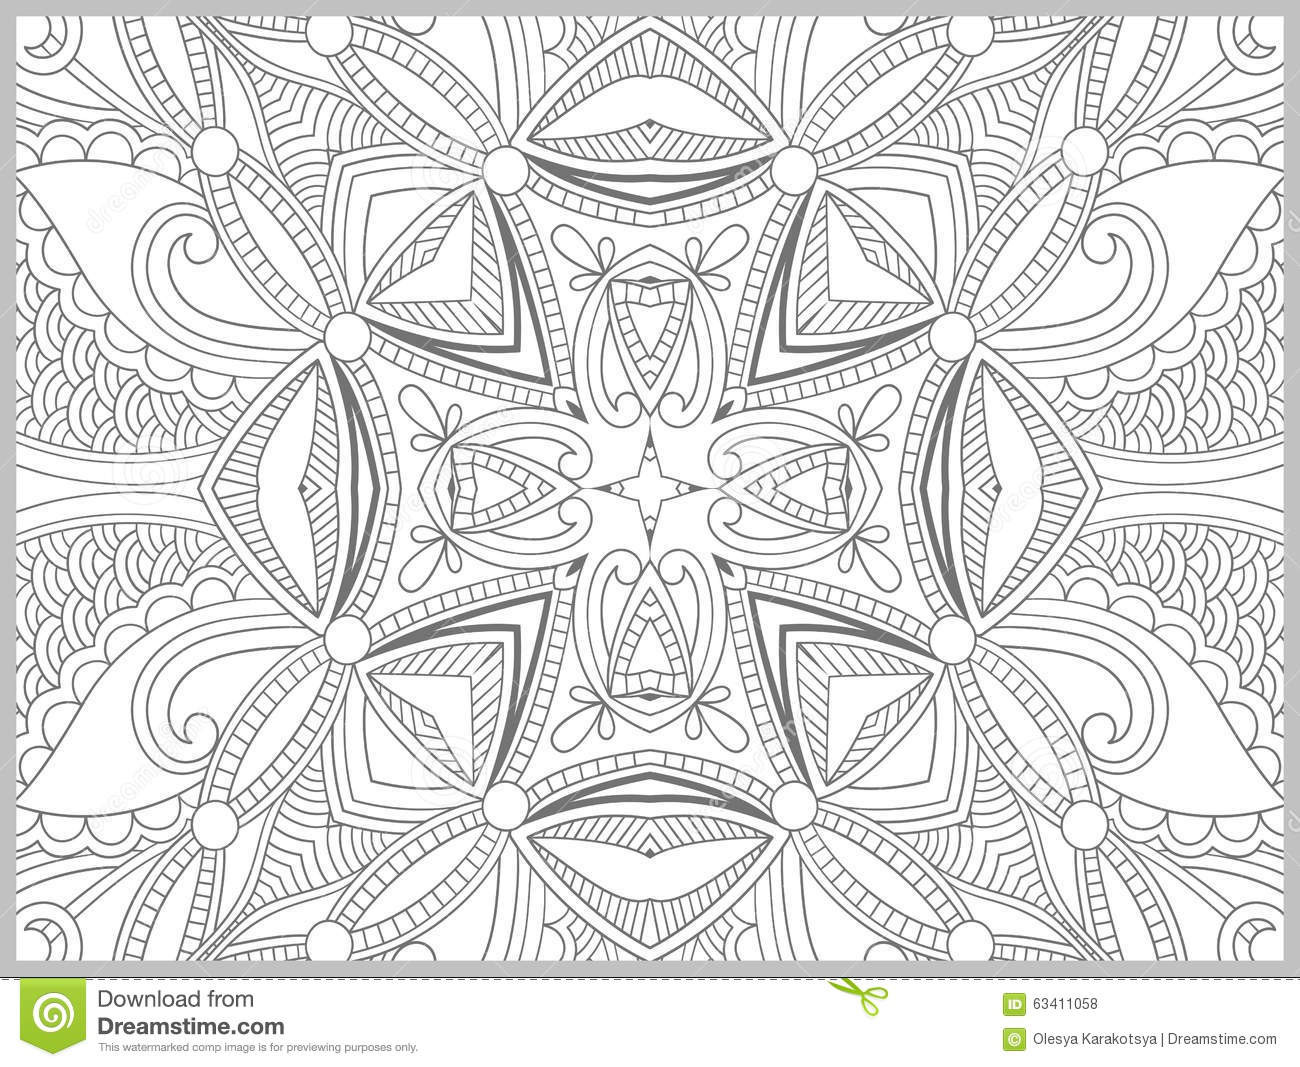 Unique Adult Coloring Books
 Unique Coloring Book Page For Adults Flower Stock Vector